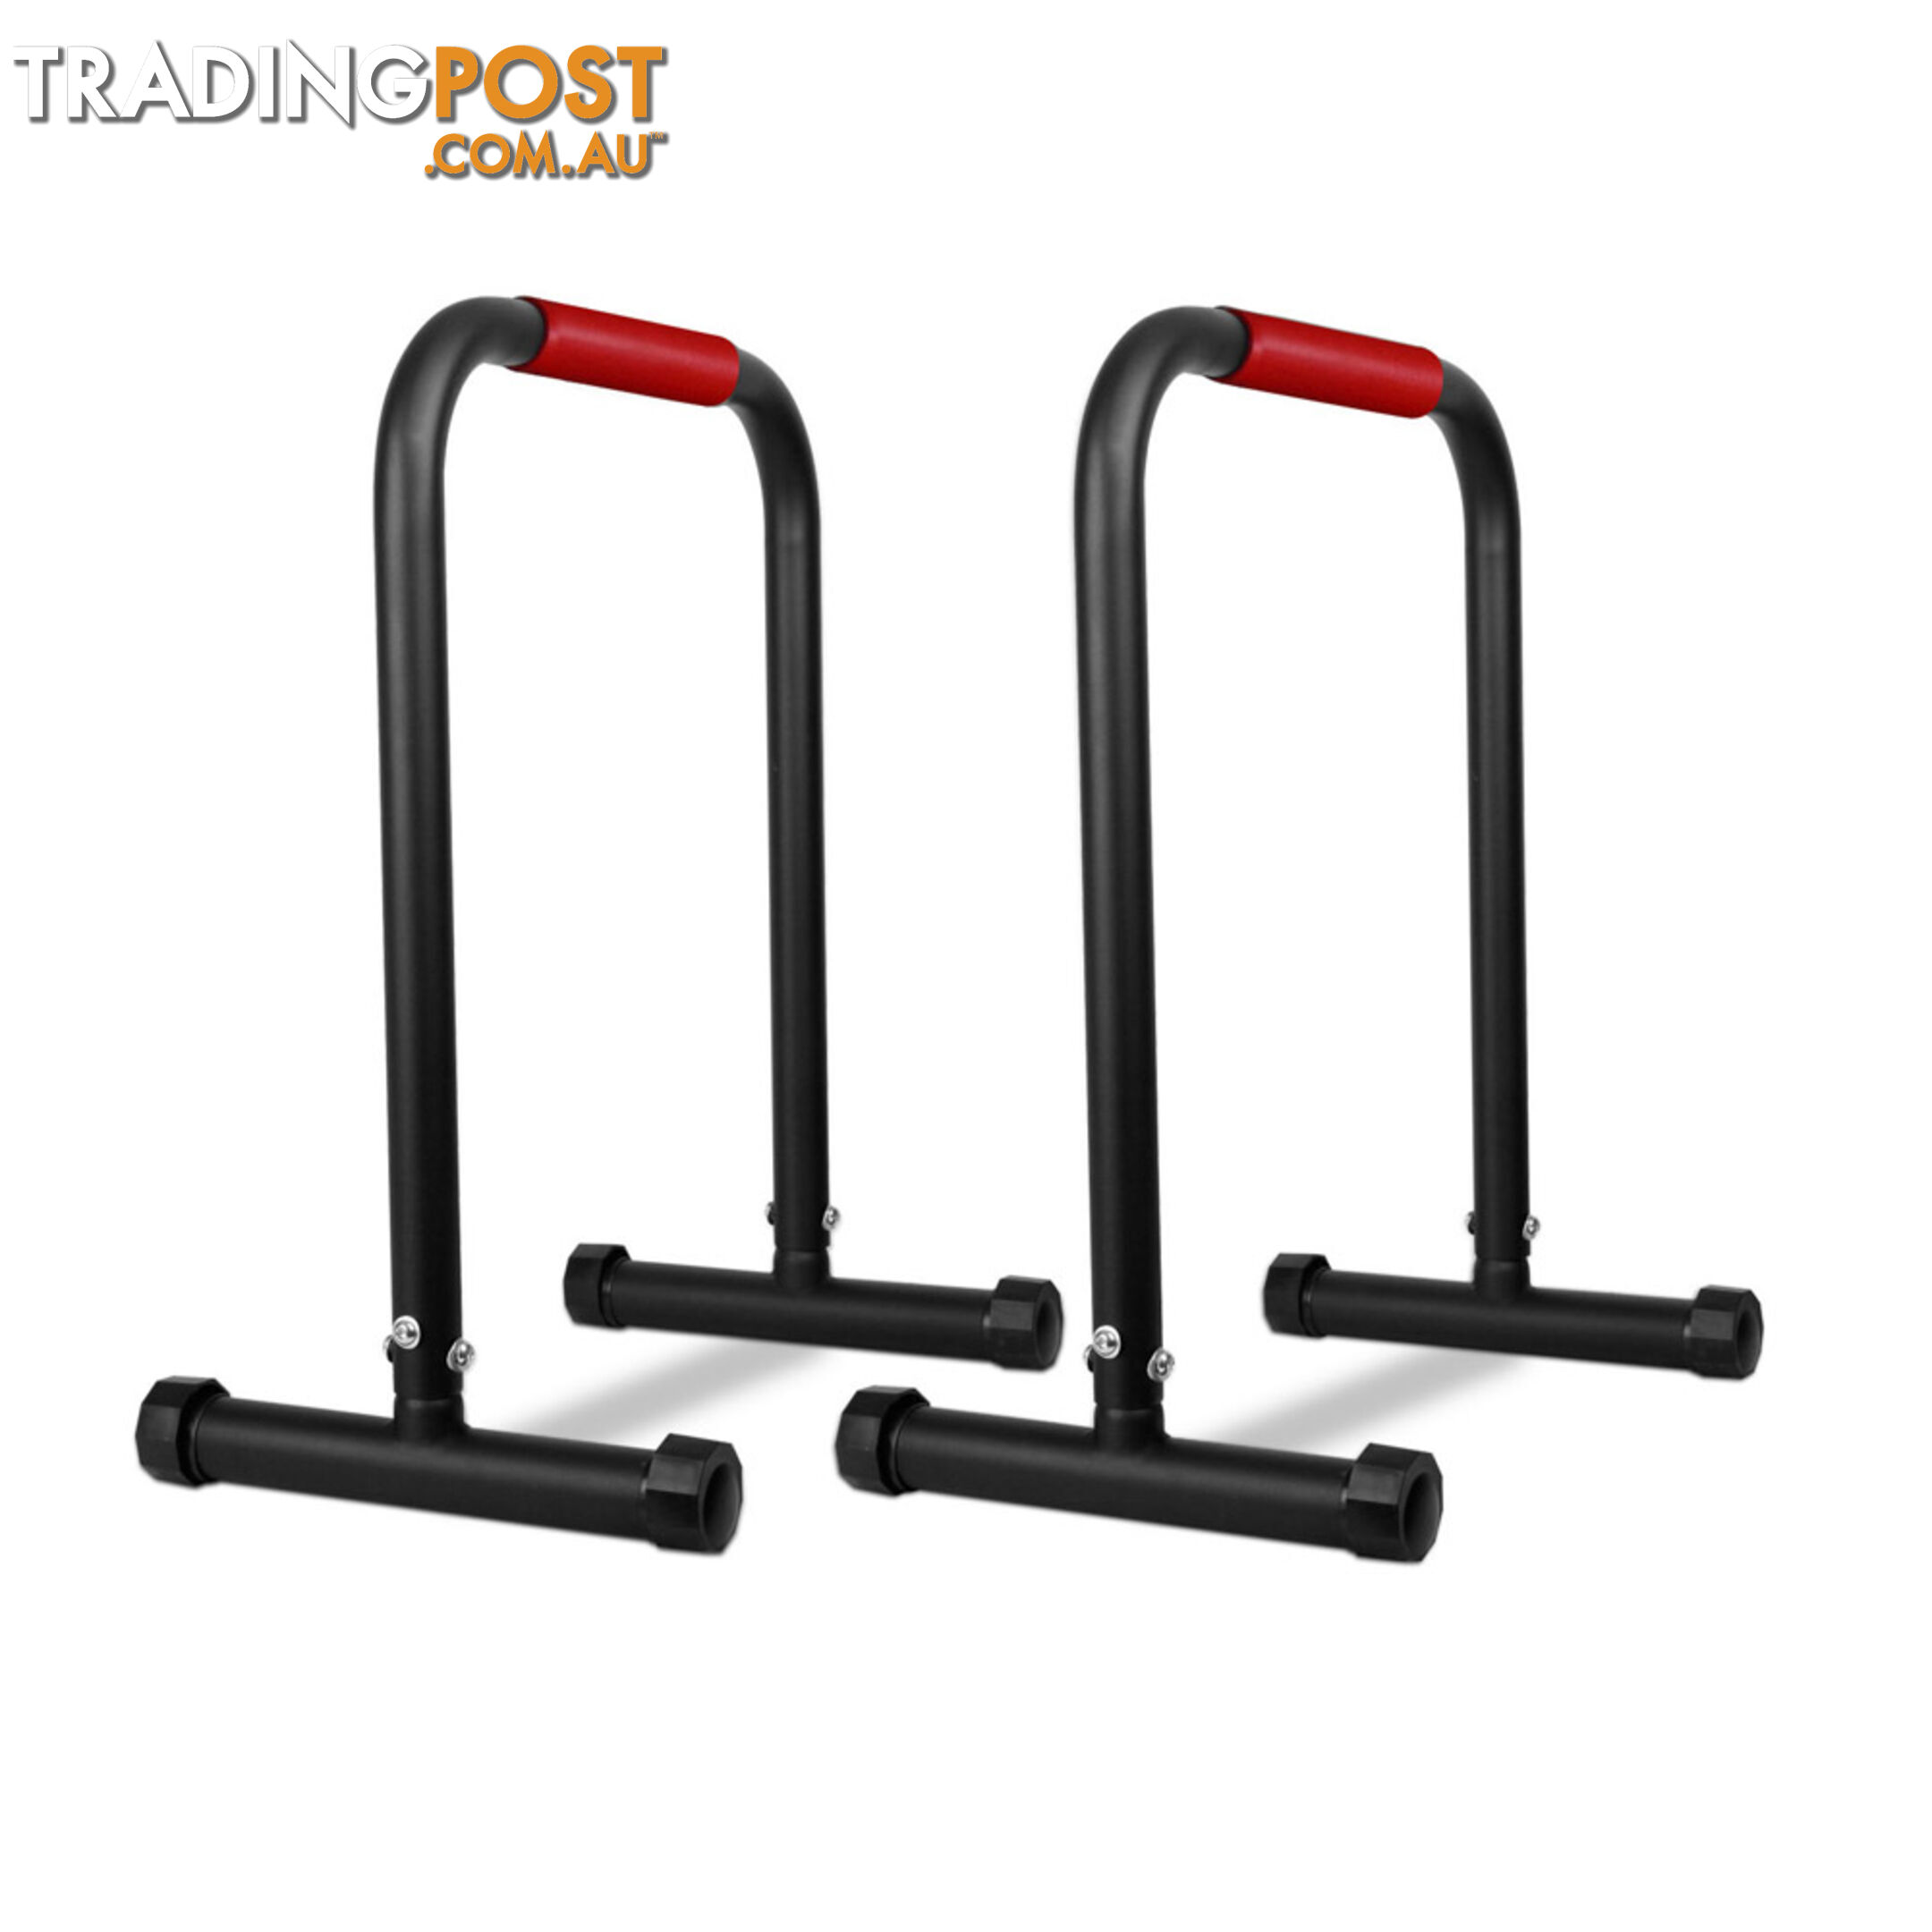 Fitness Chin Up Dip Parallel Bars Black